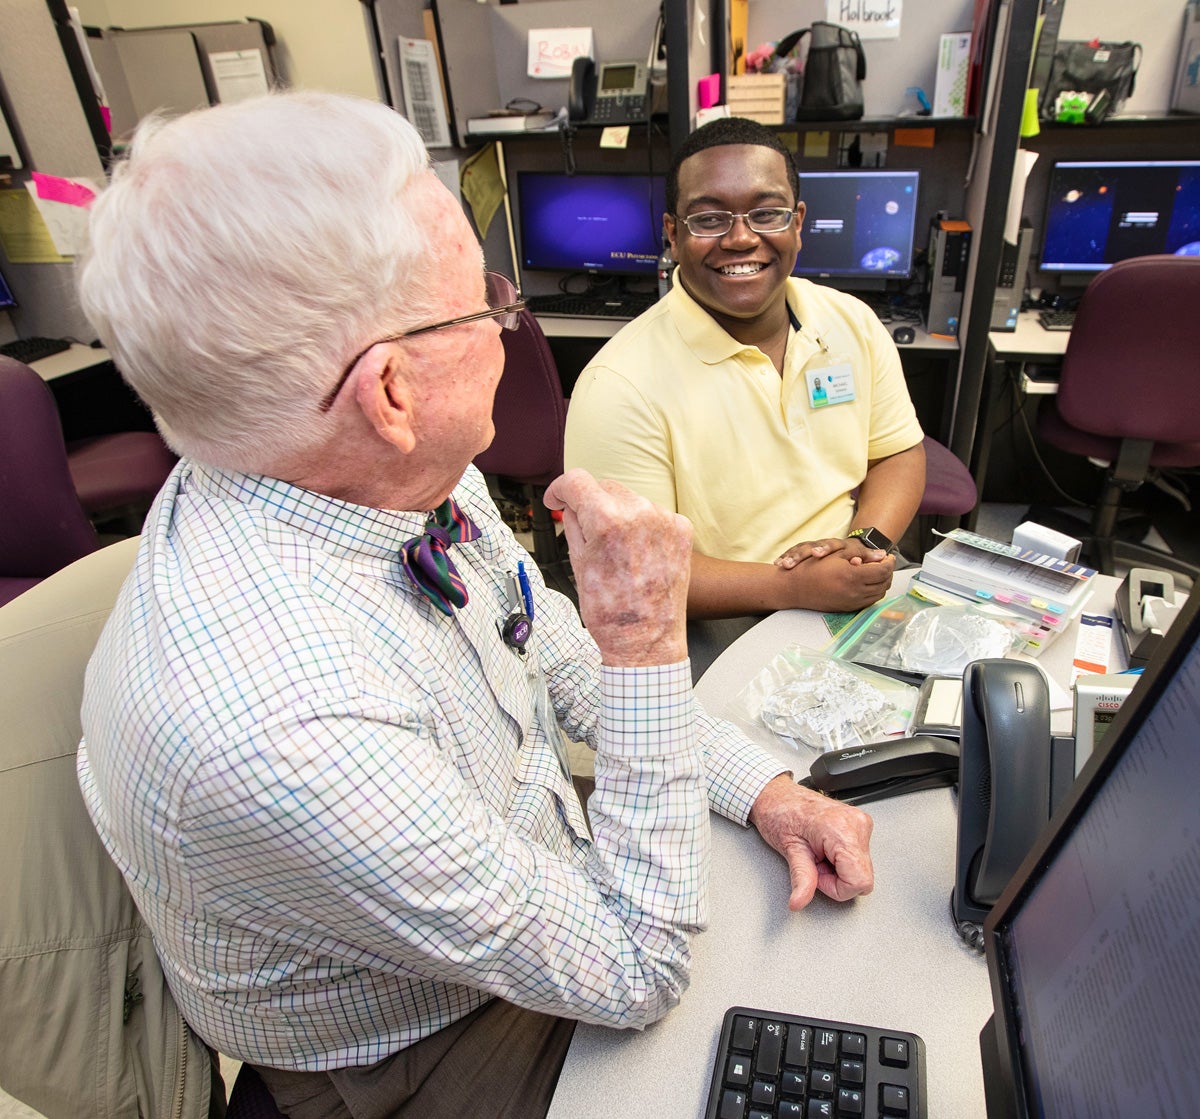 Denning smiles as he talks with Dr. Tom Irons at ECU Physicians Pediatric Outpatient Center.